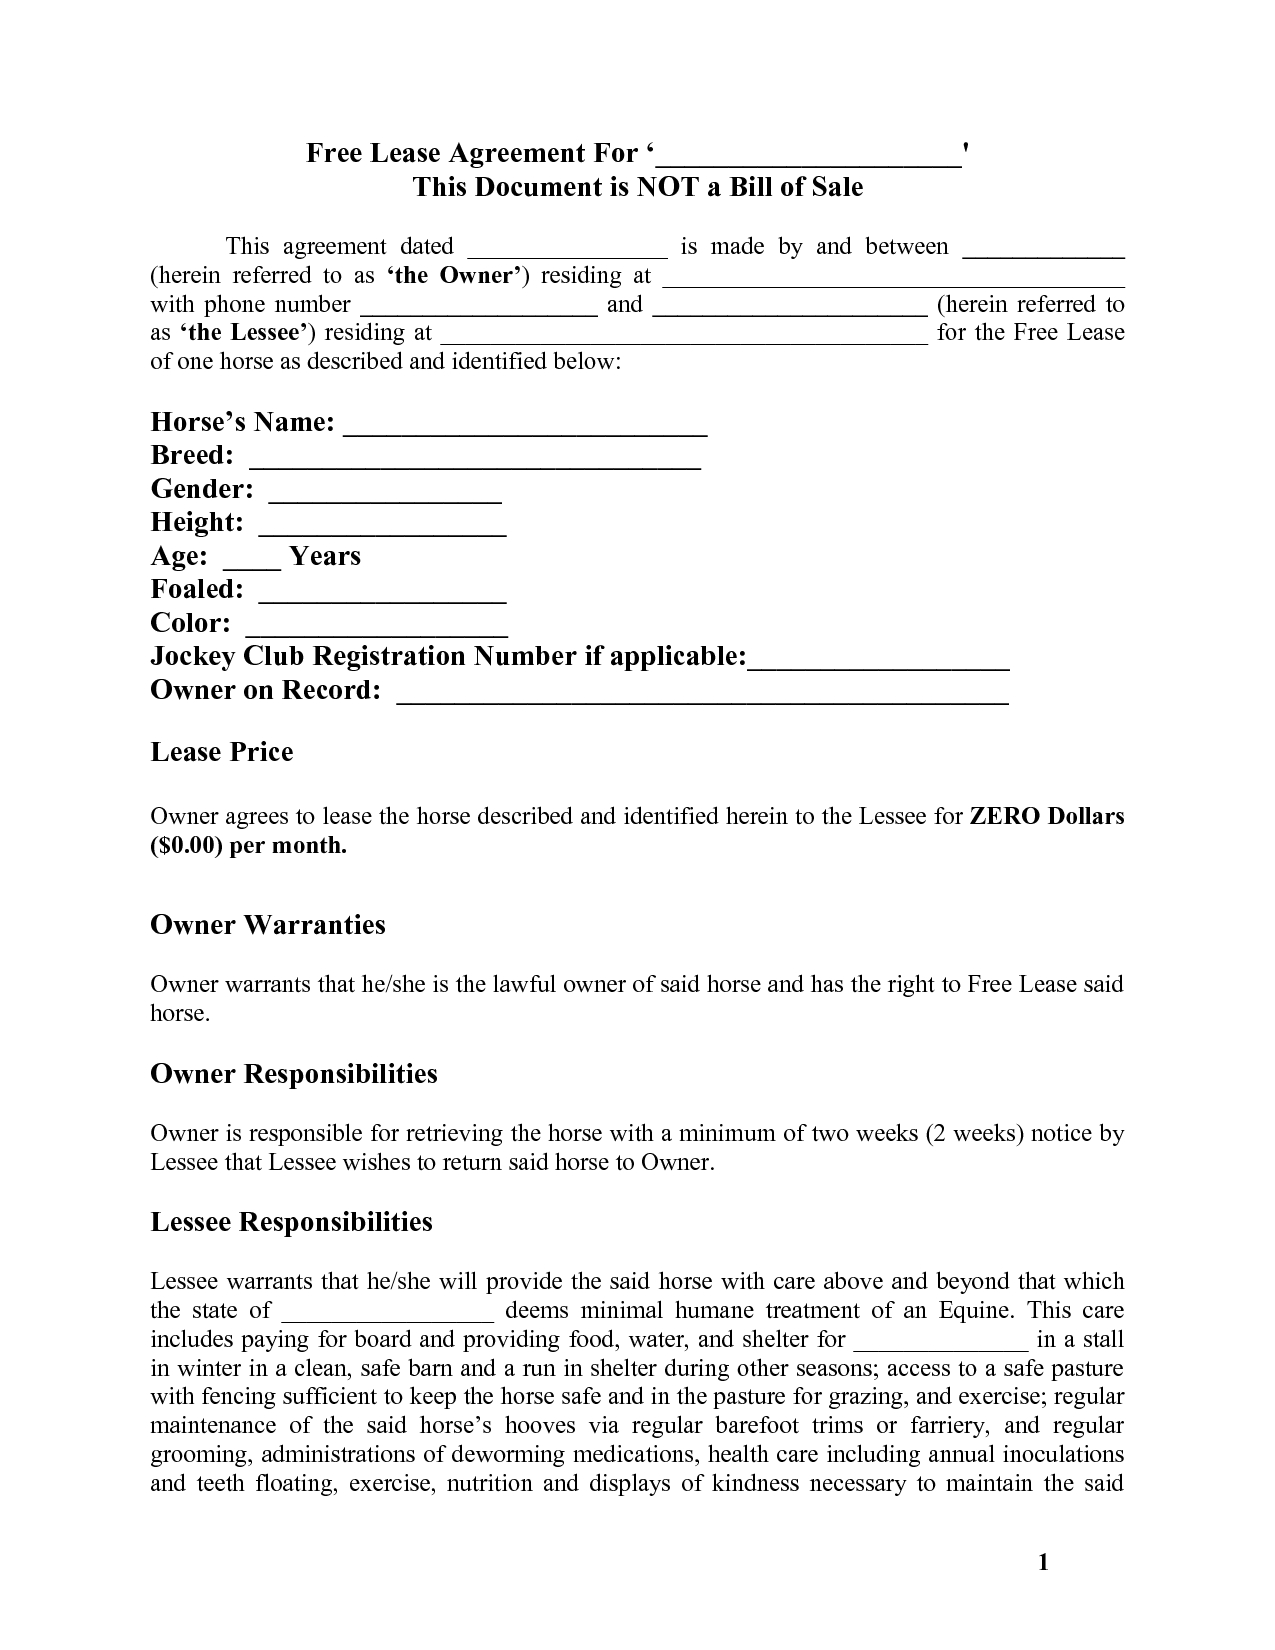 Contract For Rent To Own Home Forms - Free Printable Documents - Free Printable Documents